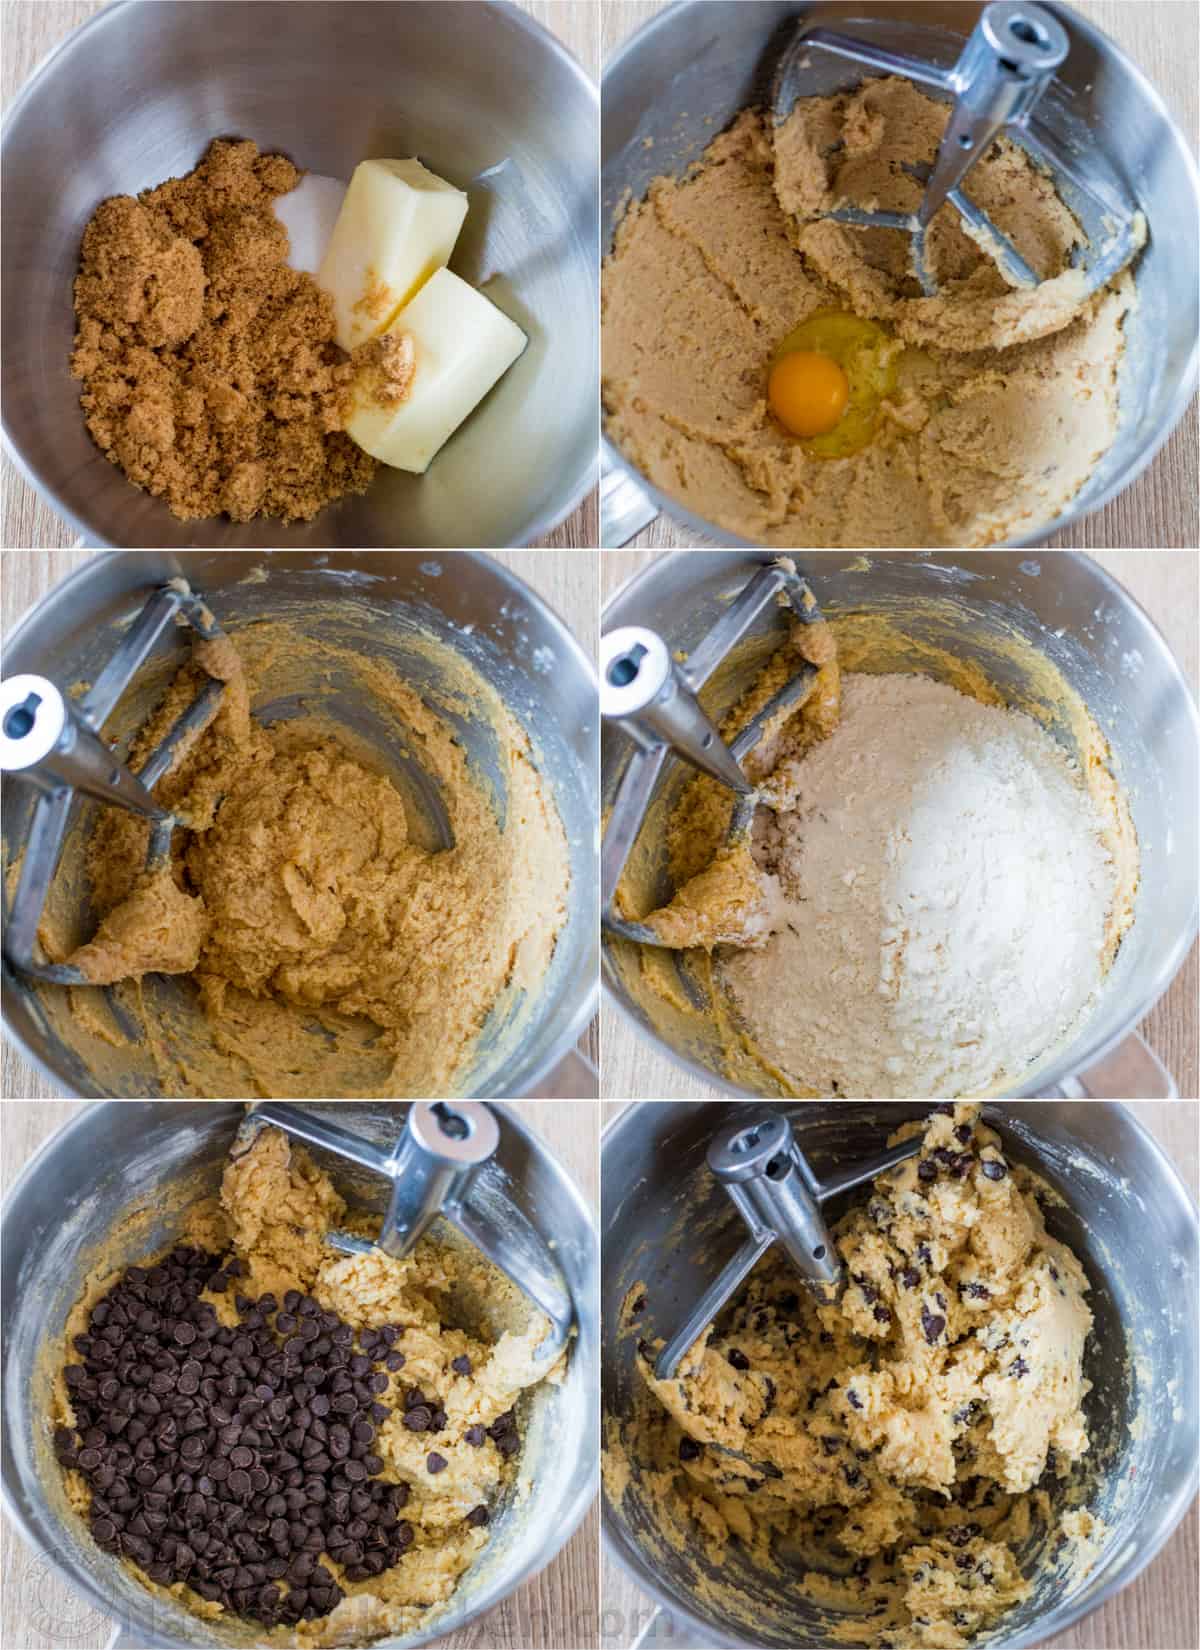 Step-by-step directions for making cookie dough